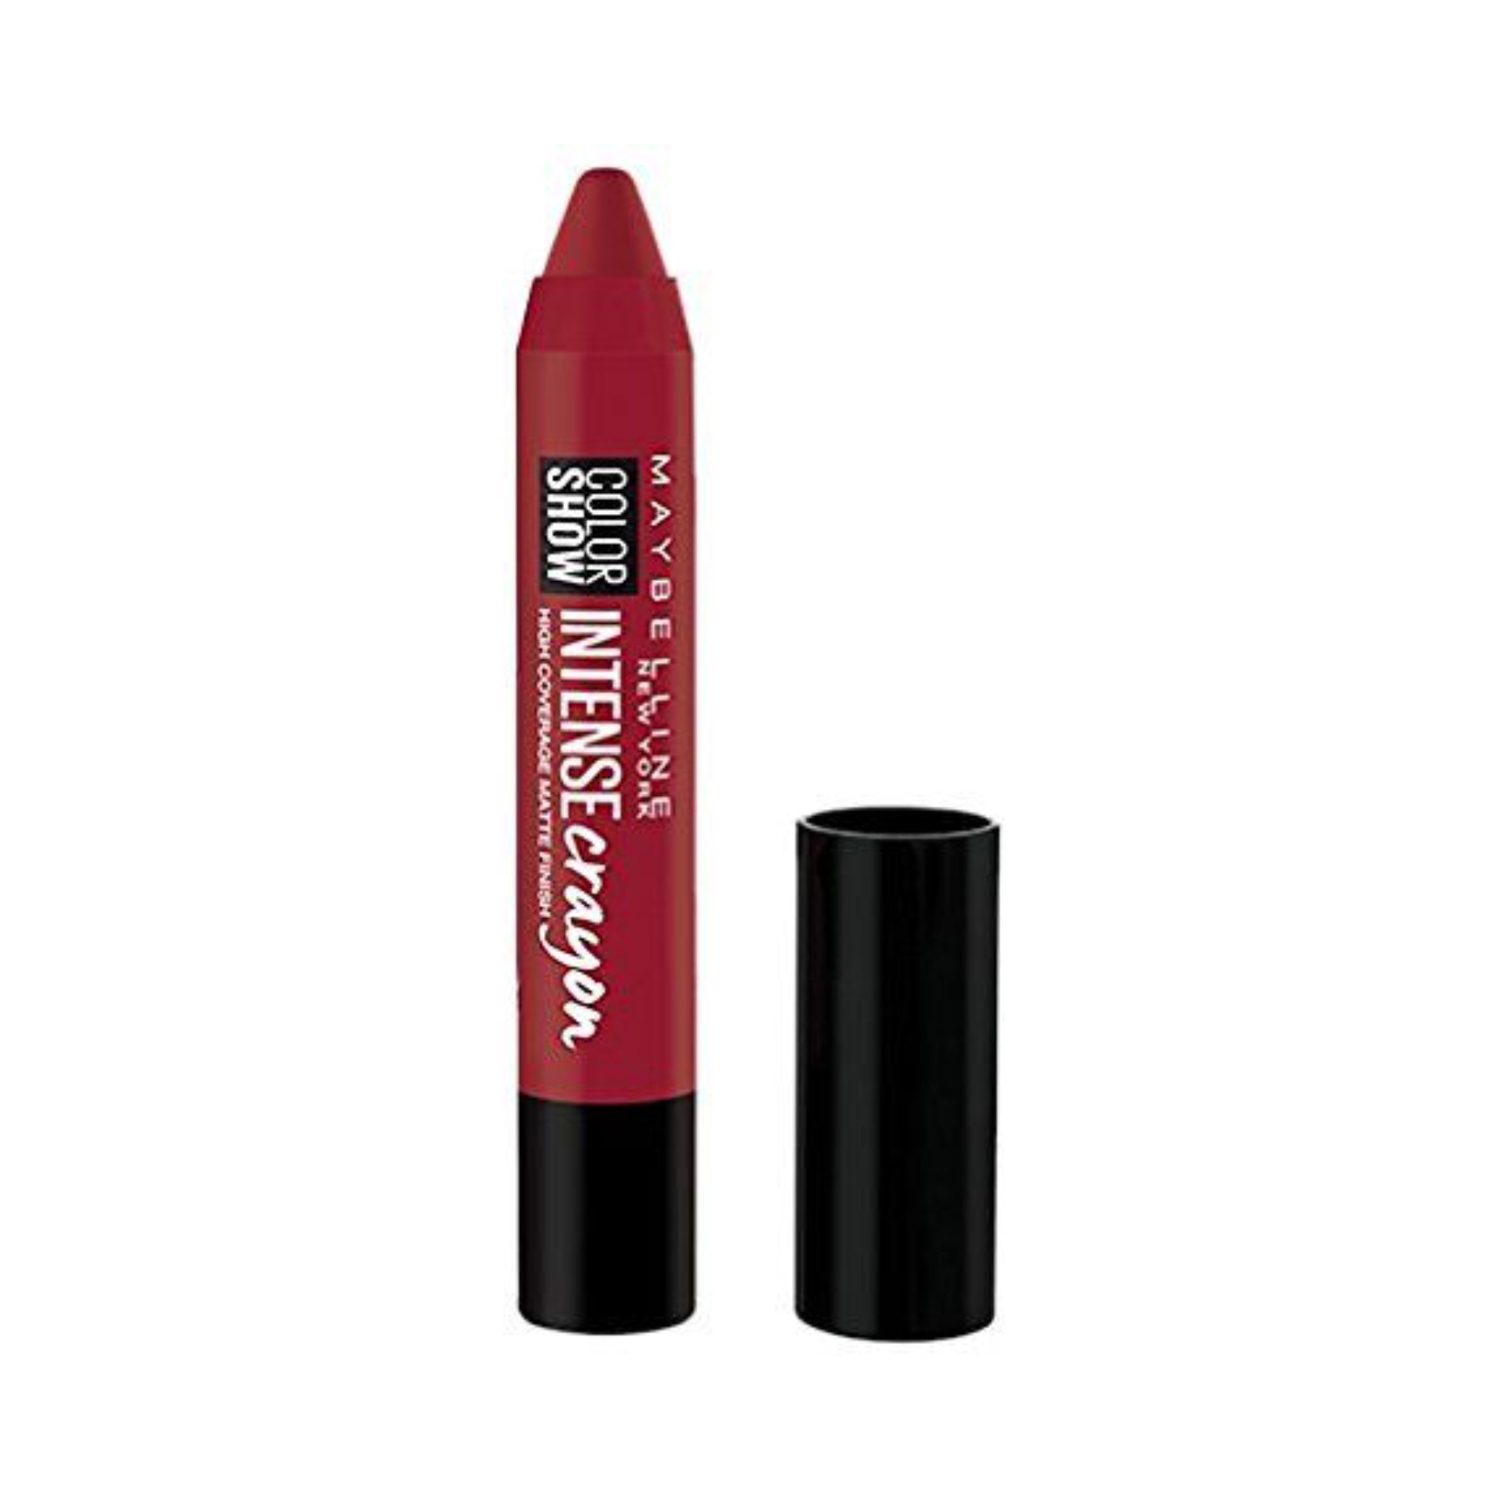 Maybelline New York Color Show Intense Lip Crayon SPF 17 - Intense Red (3.5g)